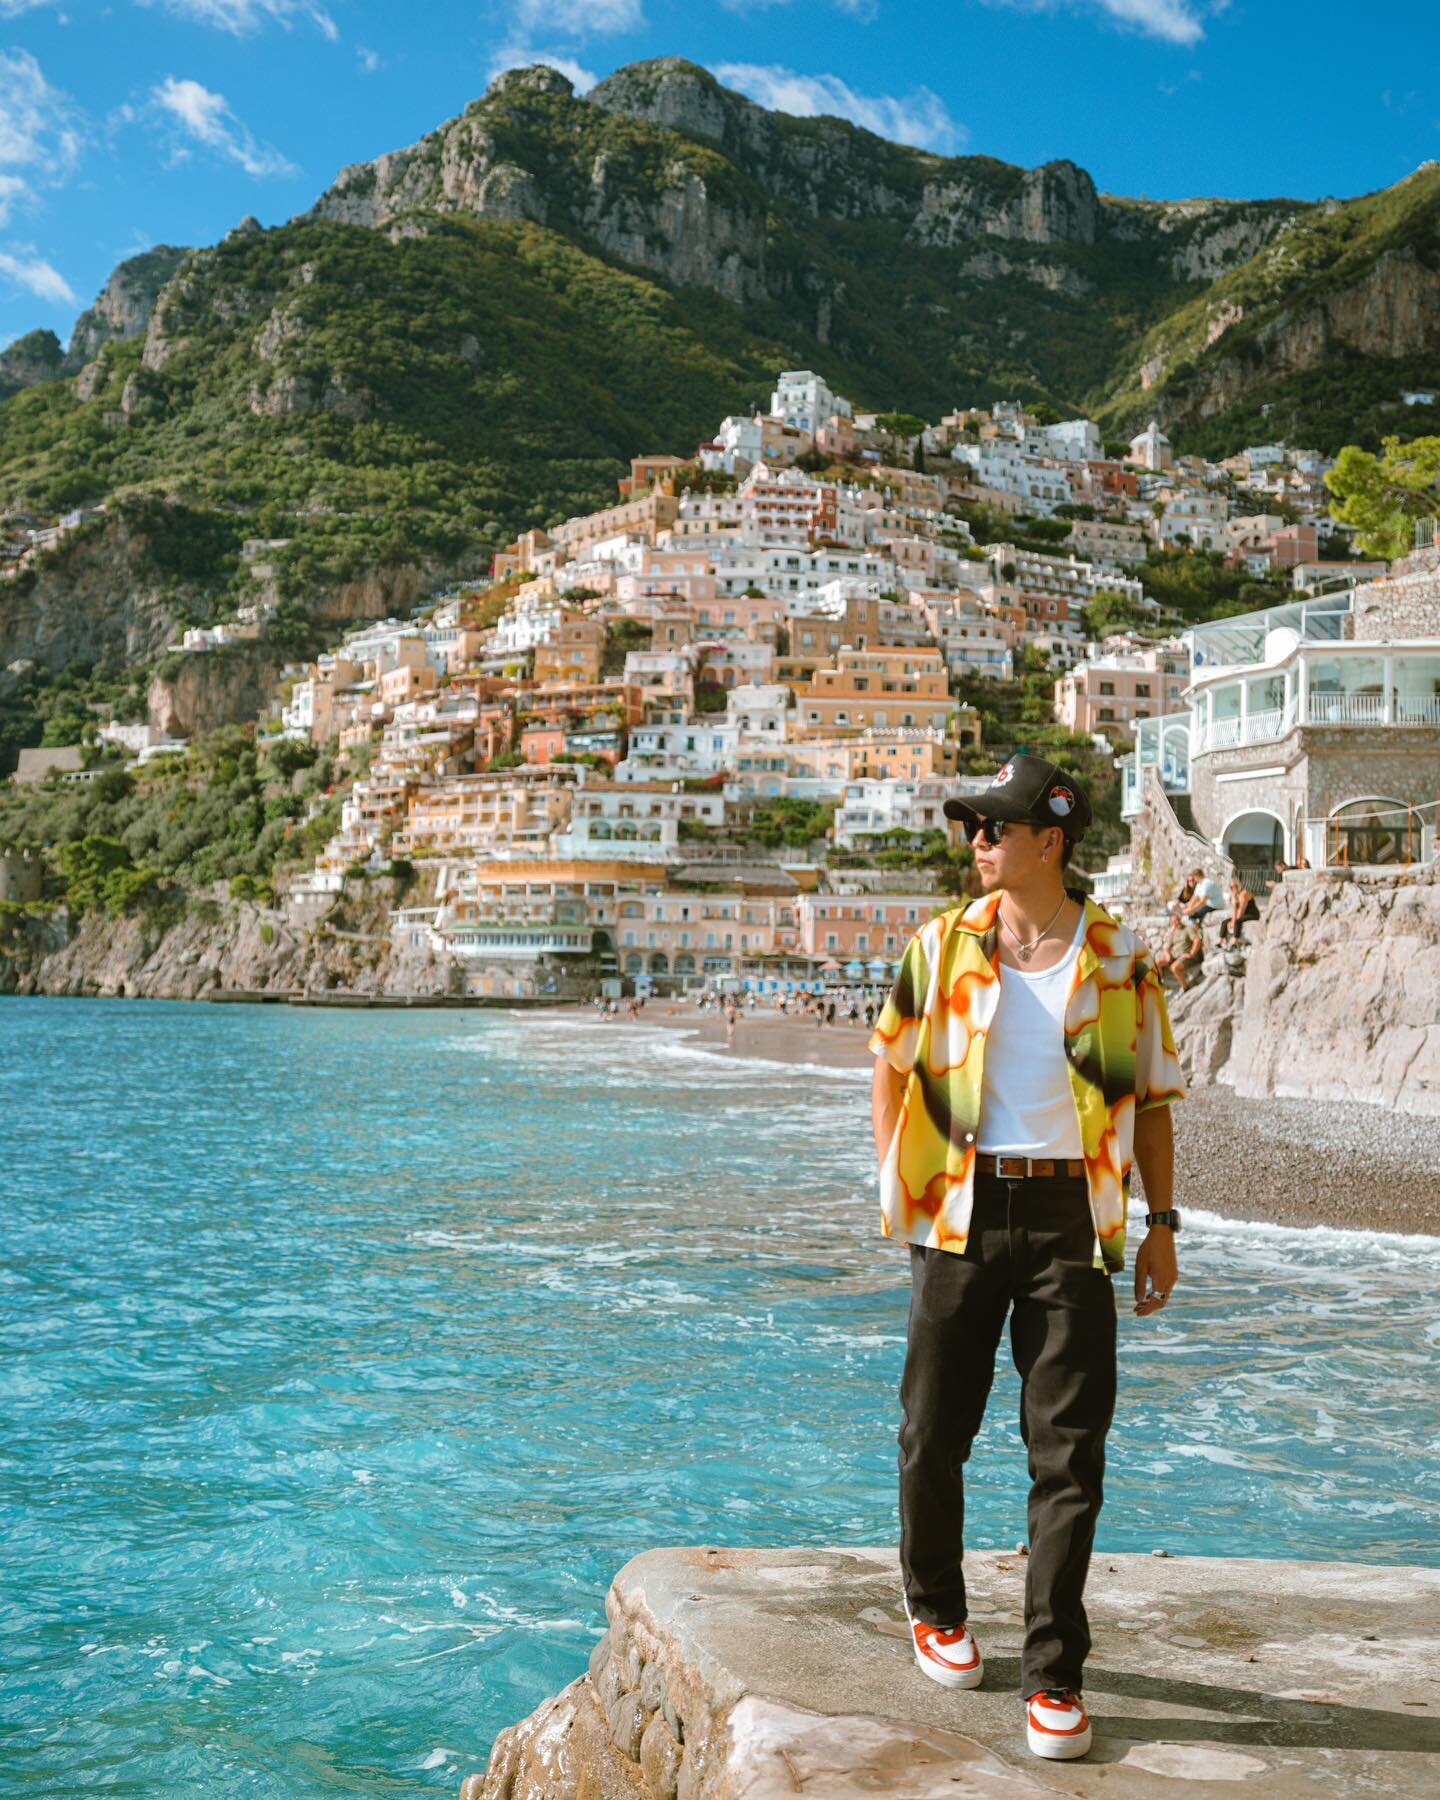 More frames from Positano 🇮🇹